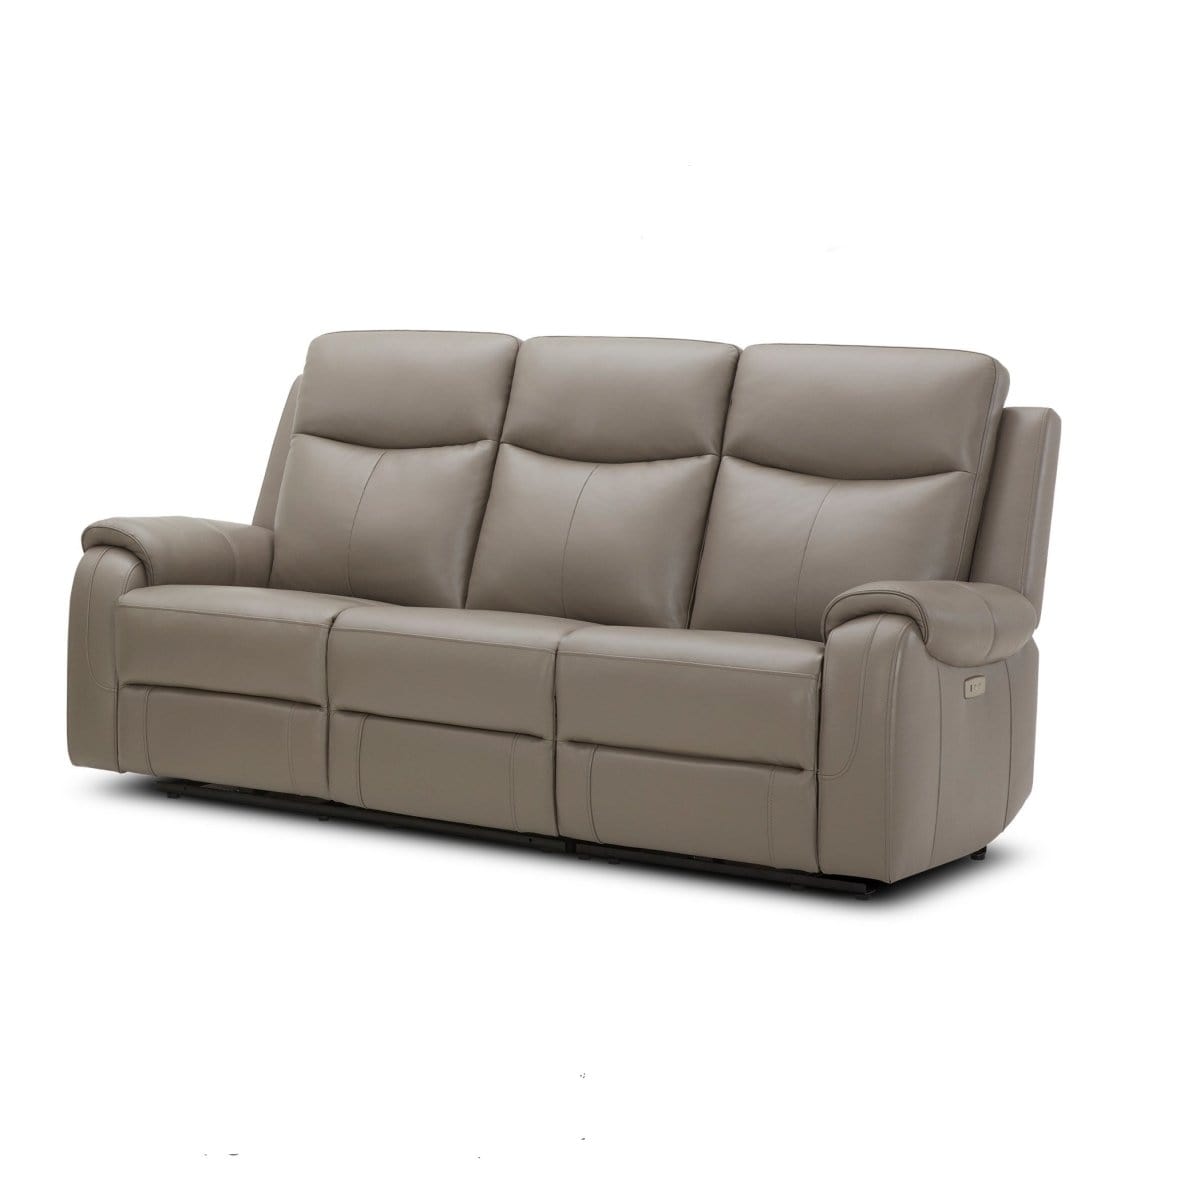 Leather Electrical Recliner Sofa